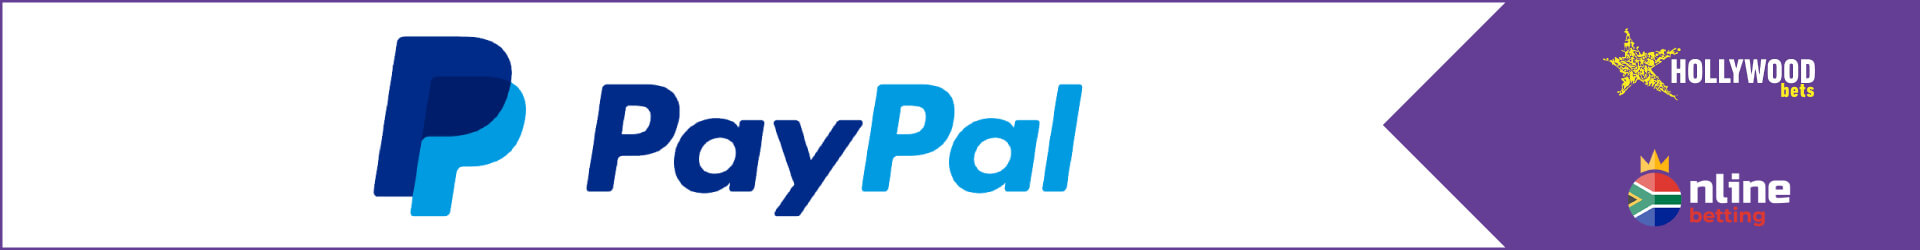 How to deposit money to HollywoodBets using PayPal